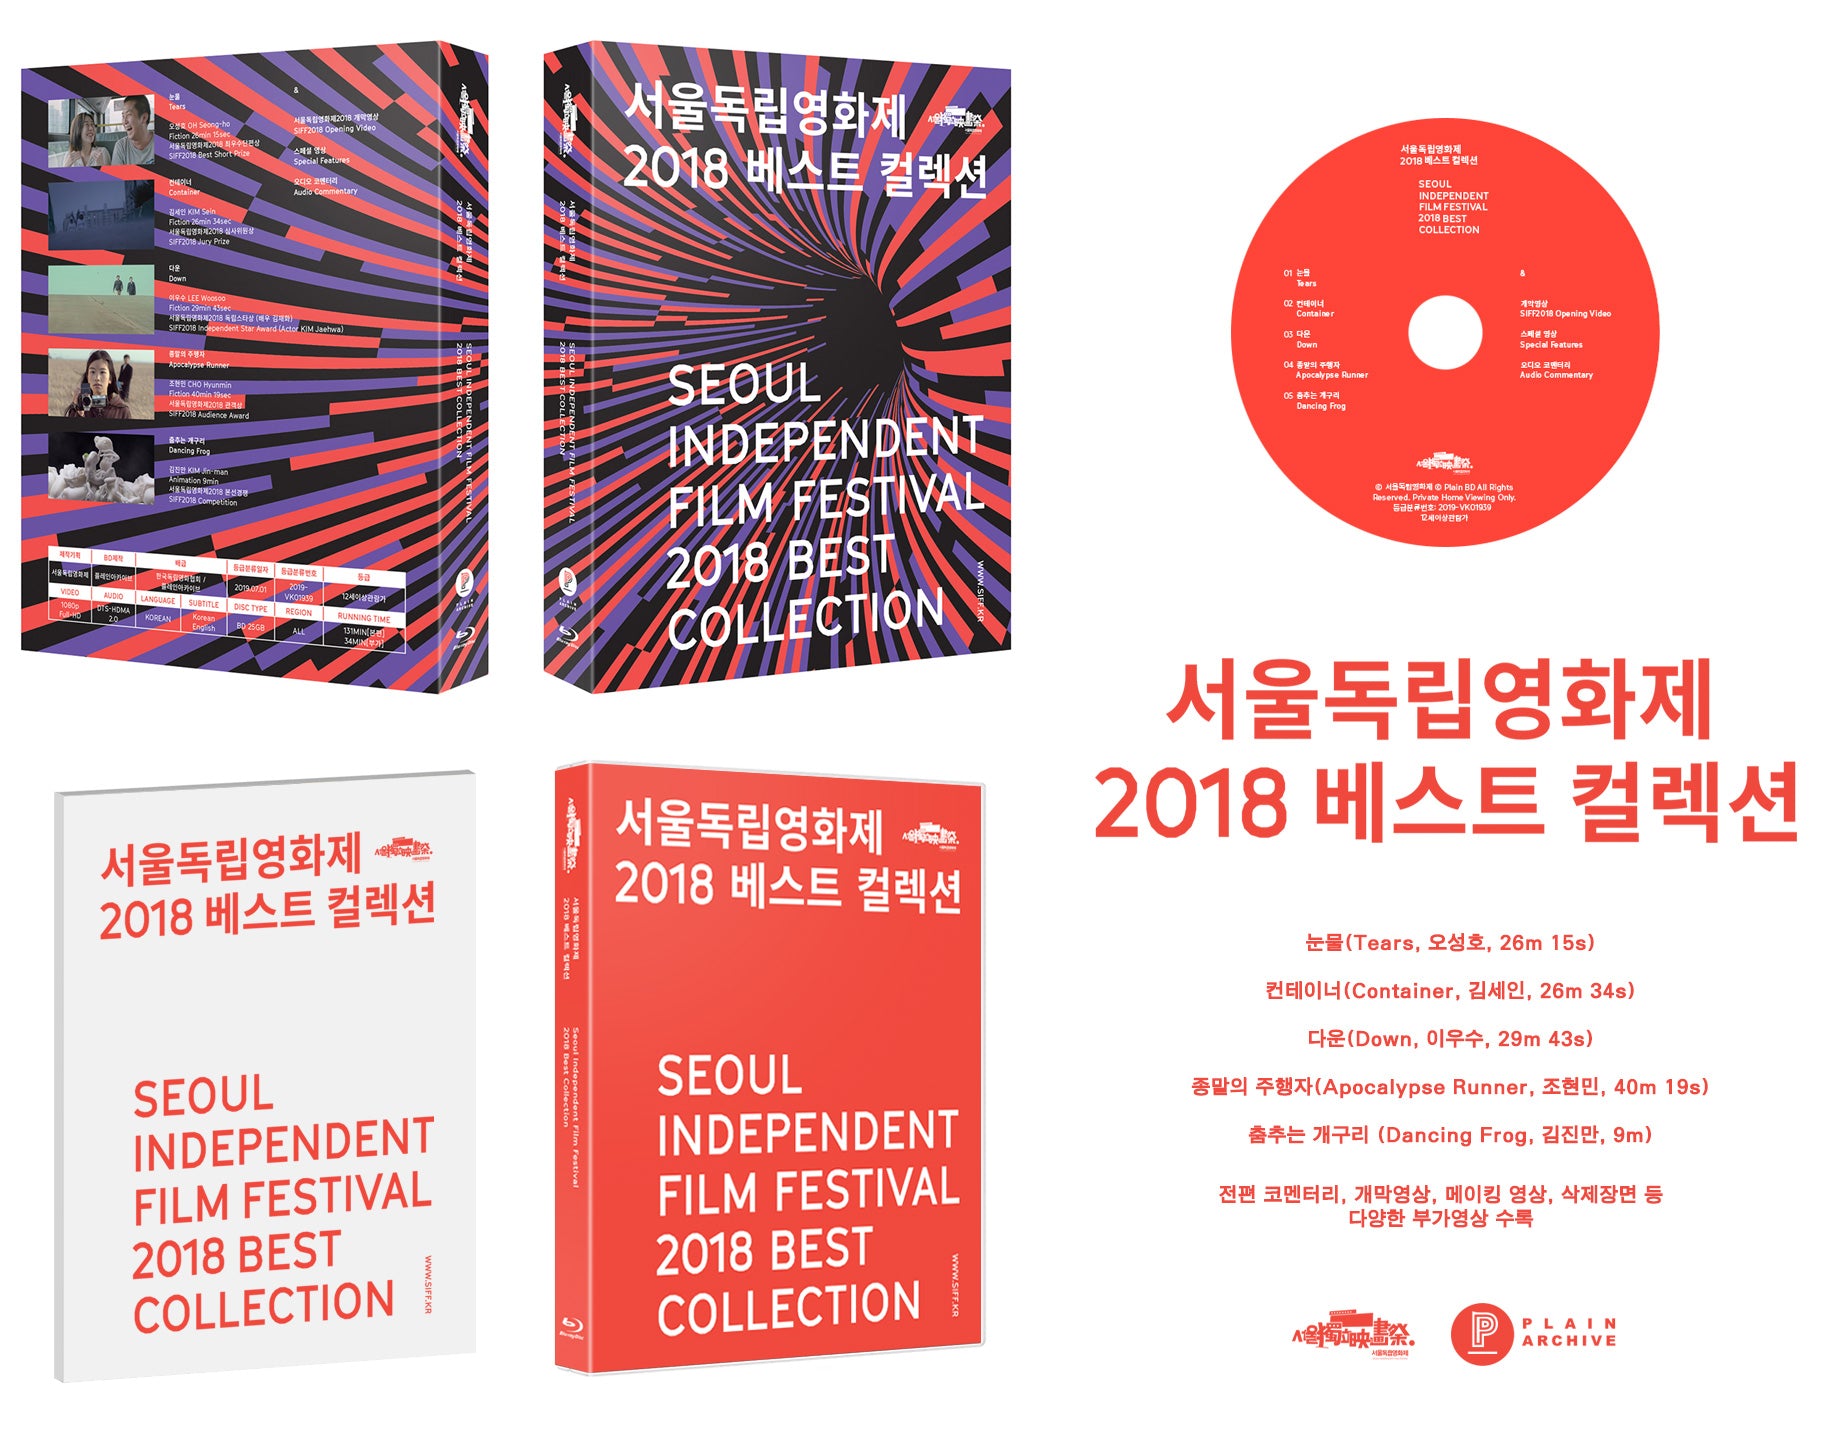 Seoul Independent Film Festival 2018 Best Collection (Limited Edition)